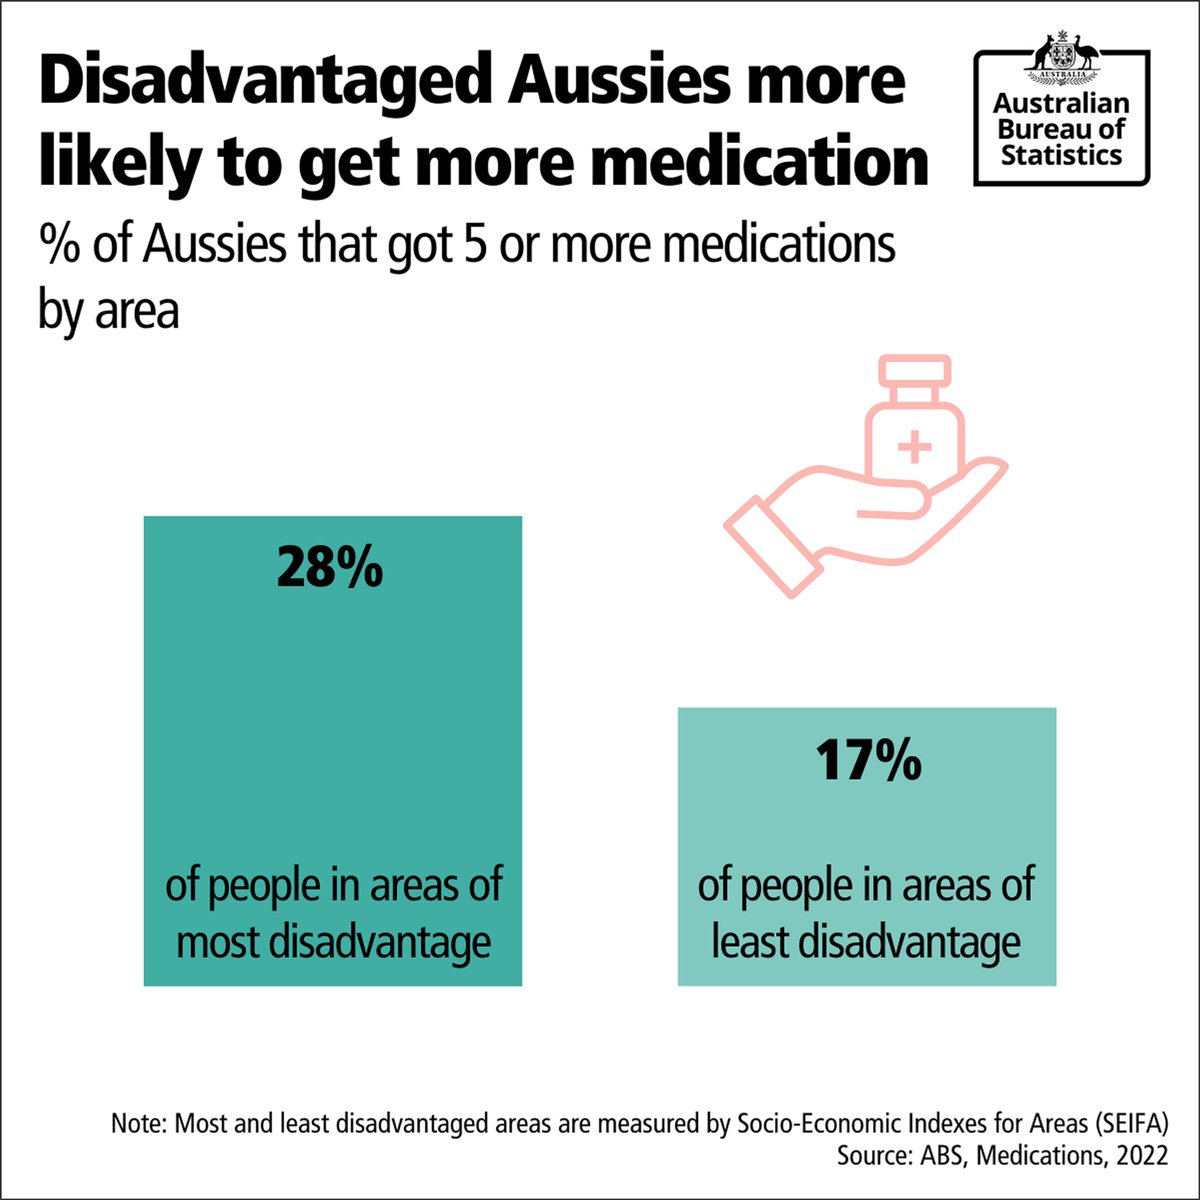 28% of Aussies living in areas of most disadvantage got 5 or more medications, compared to 17% of people living in areas of least disadvantage. Find out more here nuvi.me/vtp71b